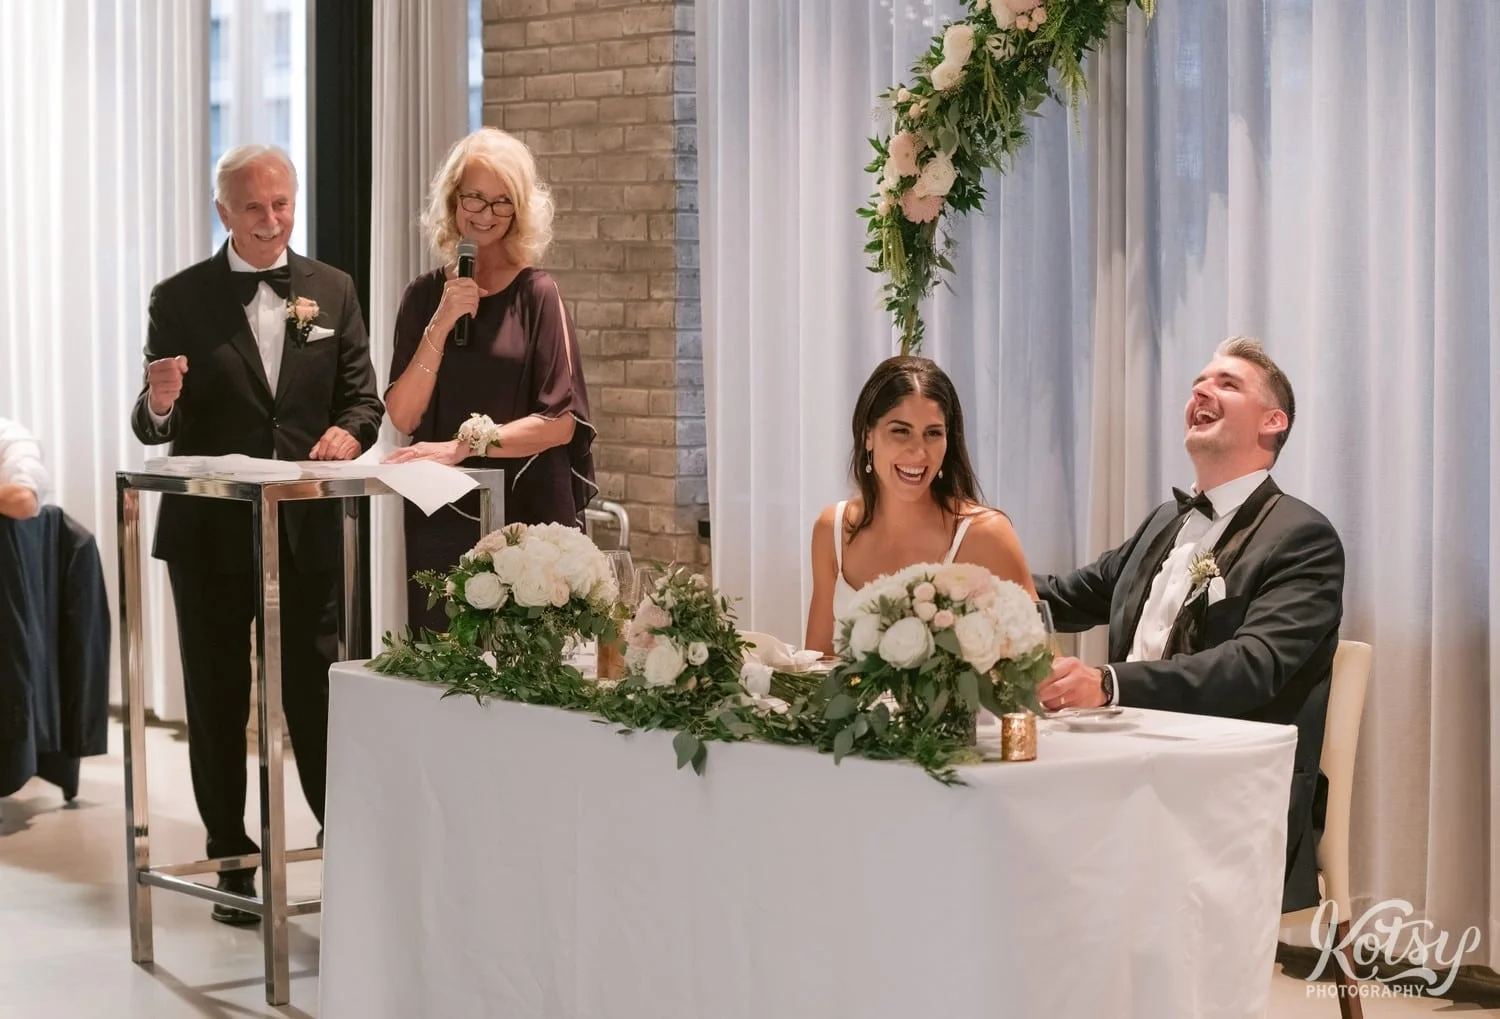 A bride and groom let out a big laugh while the groom's mother makes a speech during their Village Loft wedding reception in Toronto, Canada